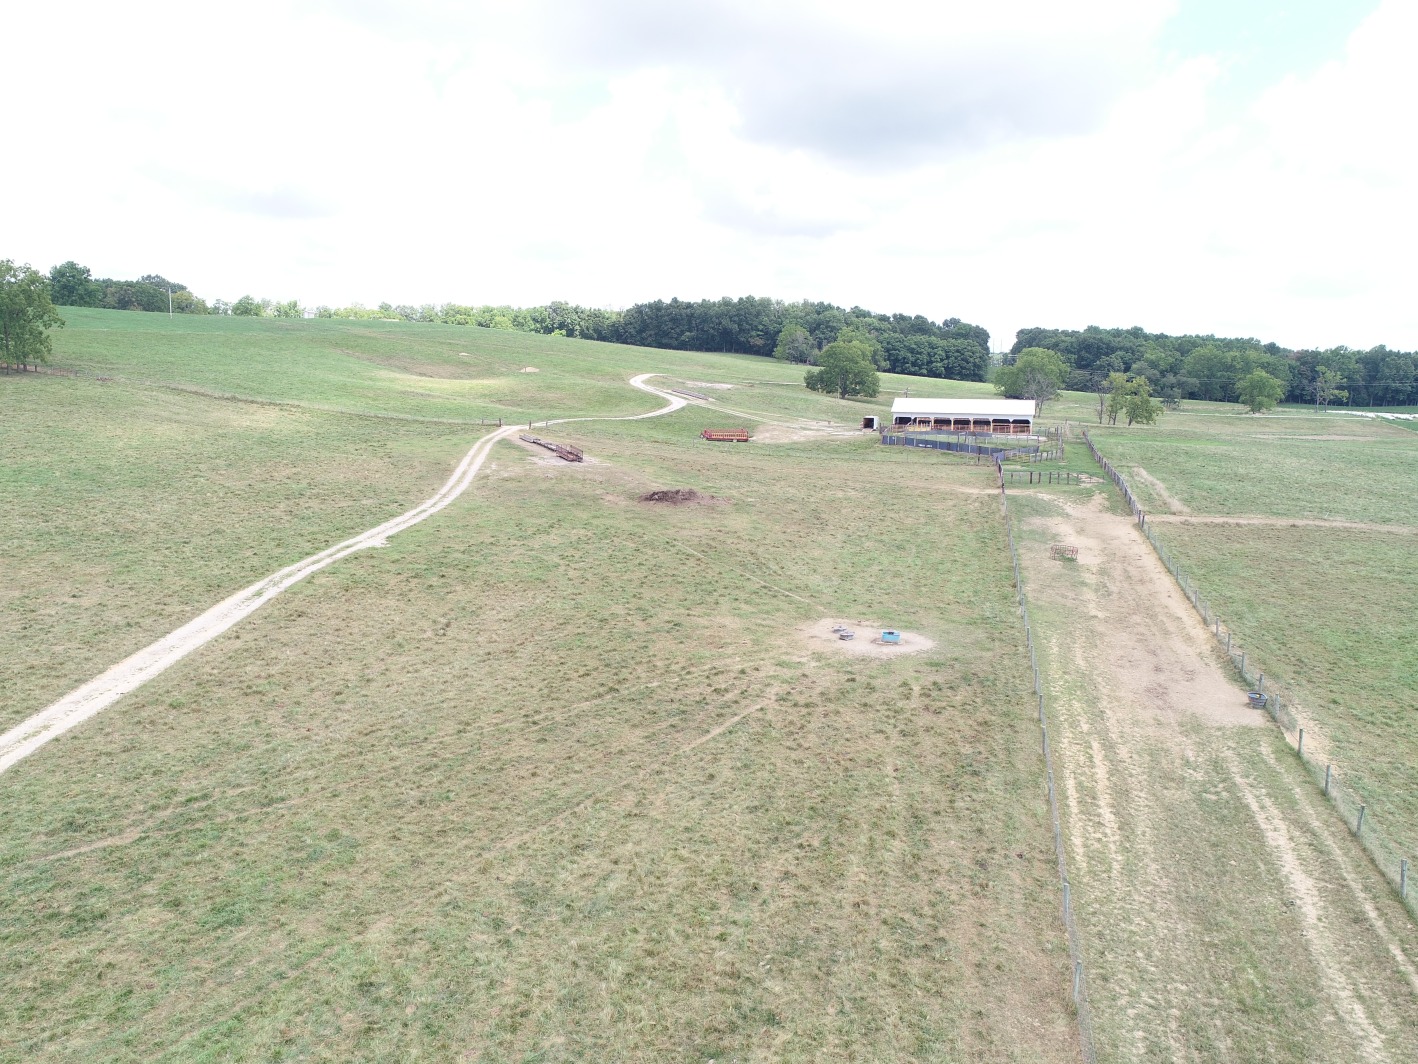 uav drone base station and barn with water station in grazing area